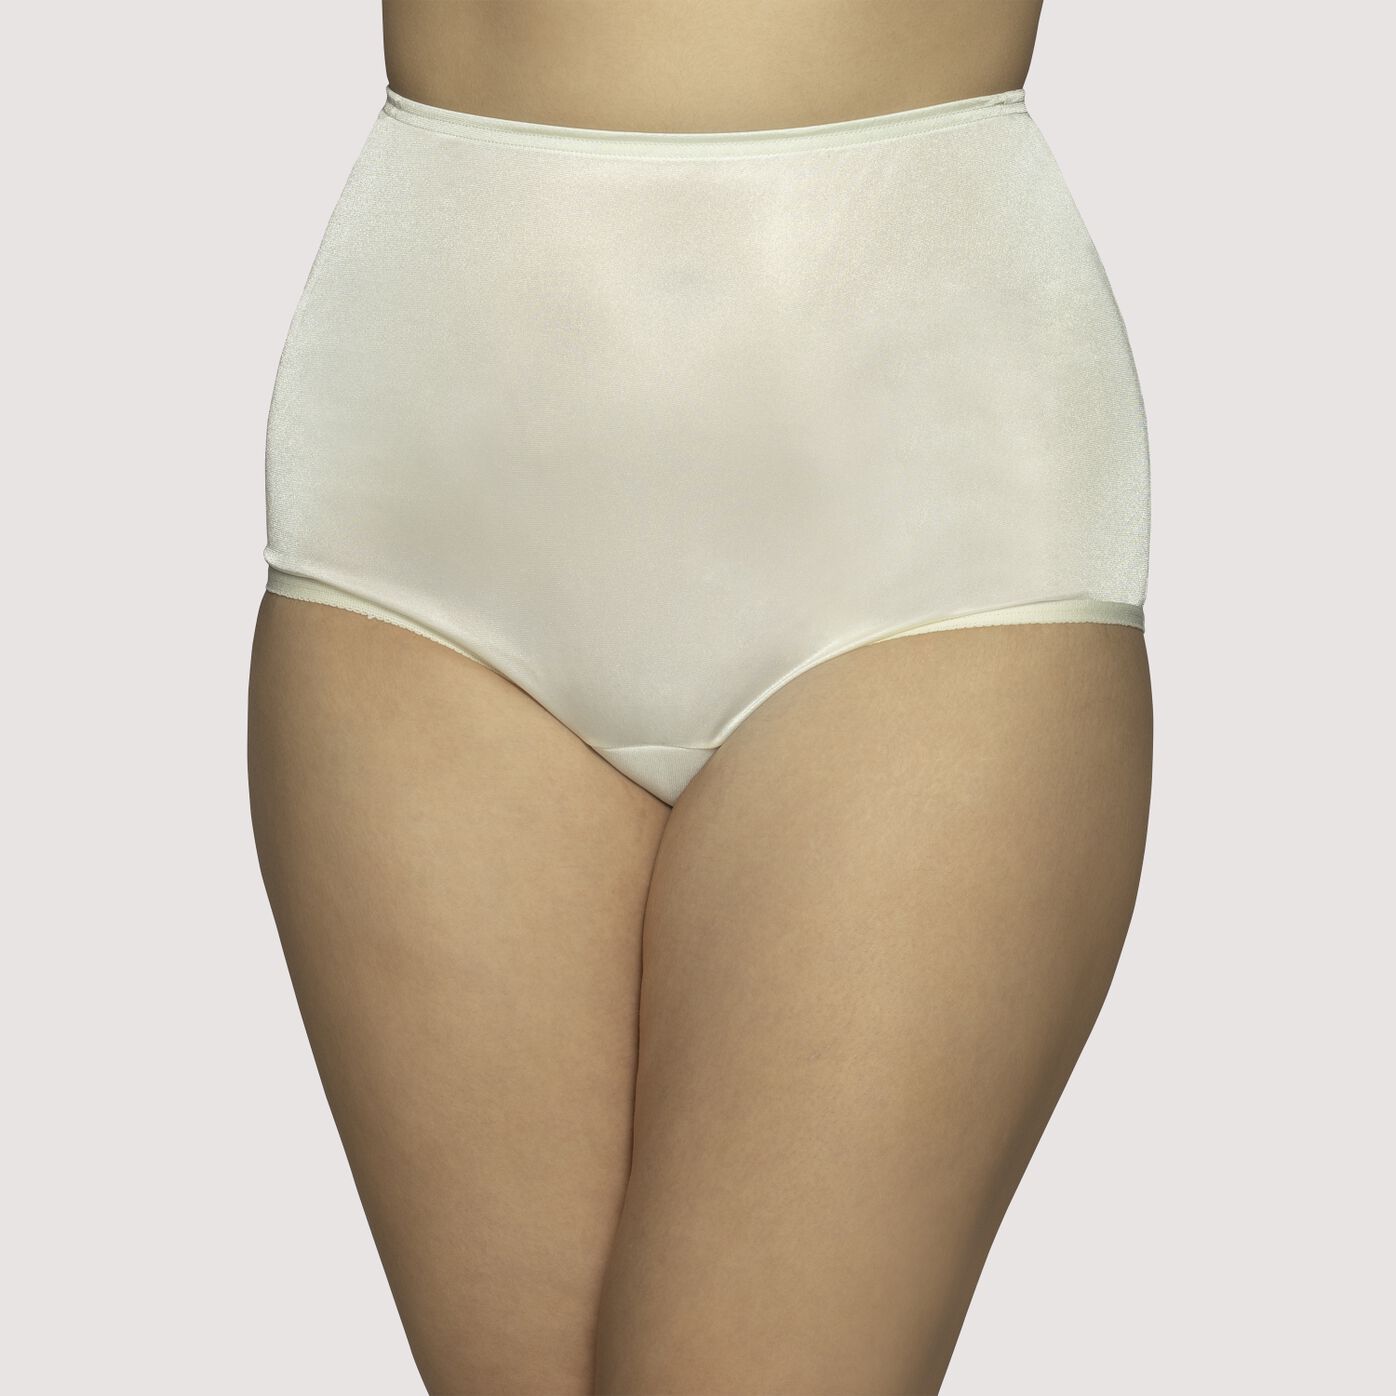 VANITY FAIR - NEW - 10 3XL 100% COTTON - FAWN - FULL COVERAGE PANTY BRIEF